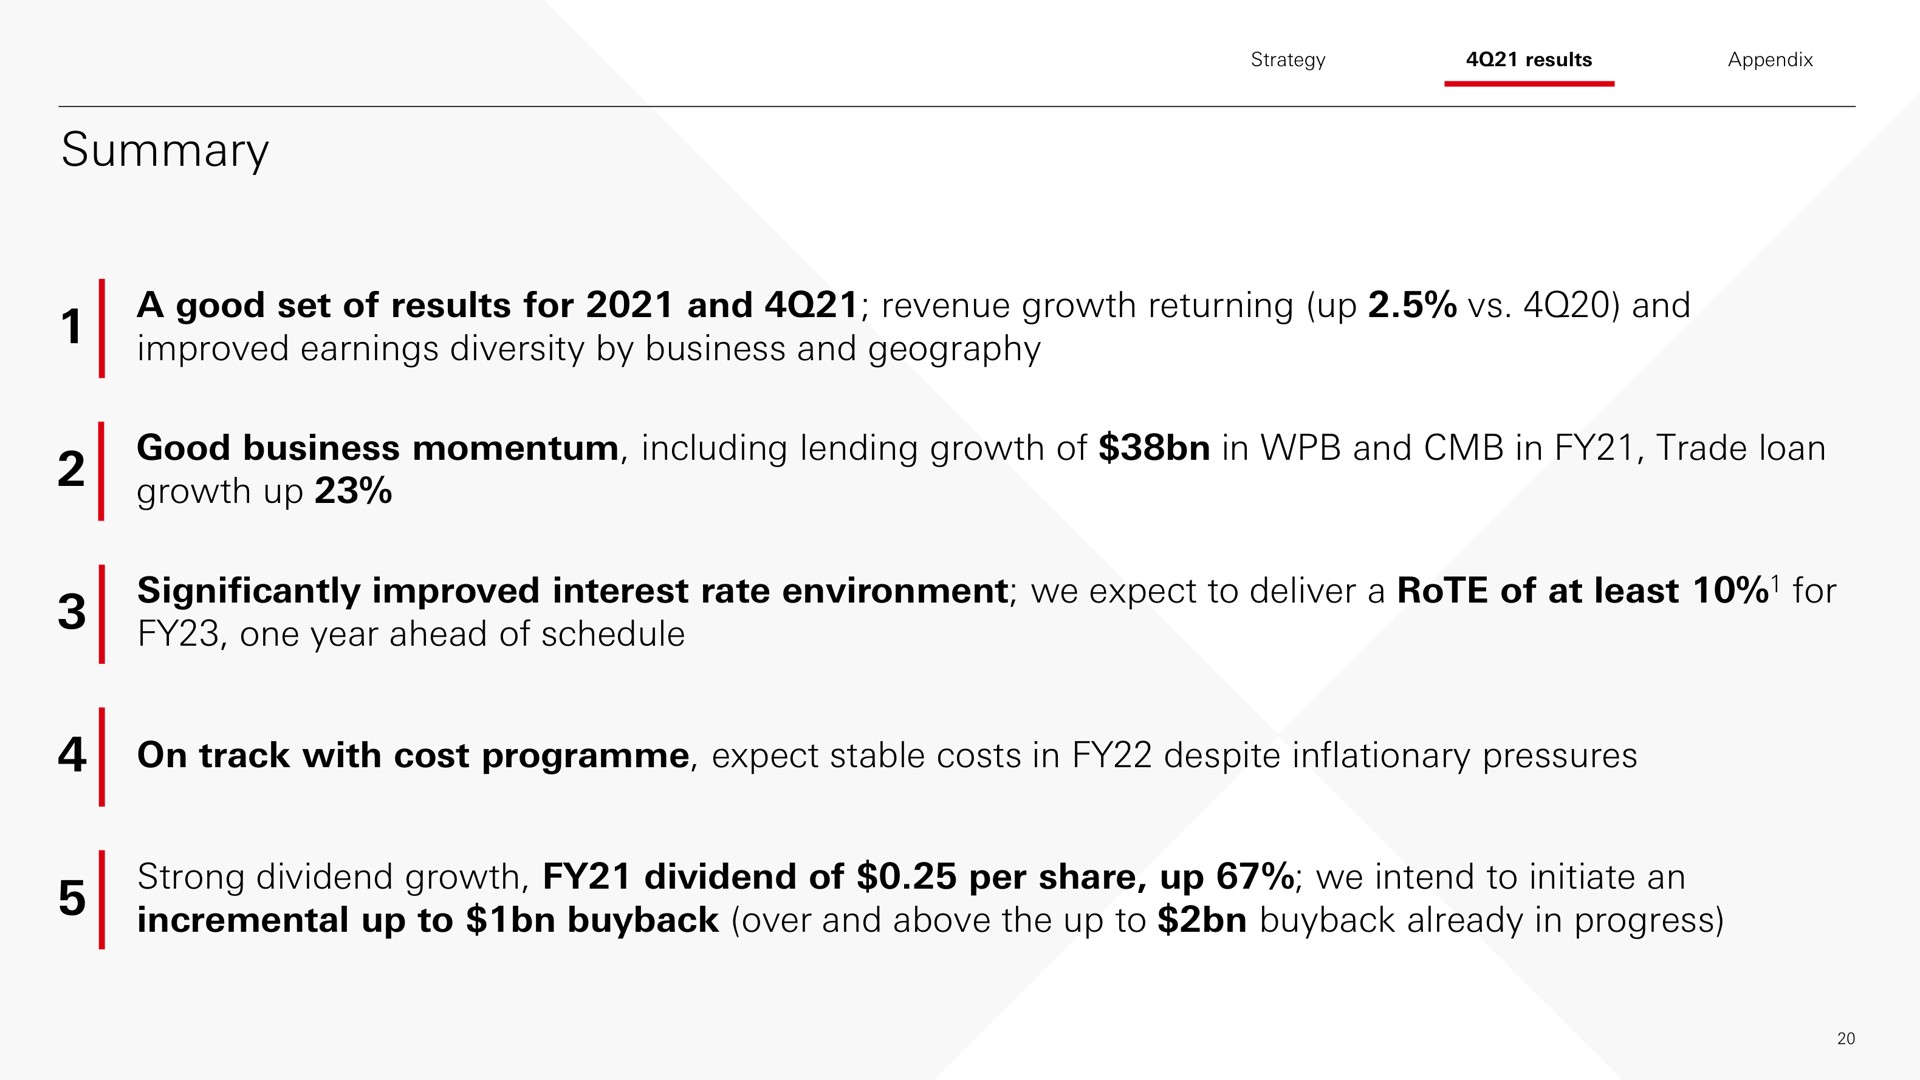 summary a good set of results for and revenue growth returning up and improved earnings diversity by business and geography good business momentum including lending growth of in and in trade loan growth up significantly improved interest rate environment we expect to deliver a rote of at least for one year ahead of schedule on track with cost expect stable costs in despite inflationary pressures strong dividend growth dividend of per share up we intend to initiate an incremental up to over and above the up to already in progress | HSBC